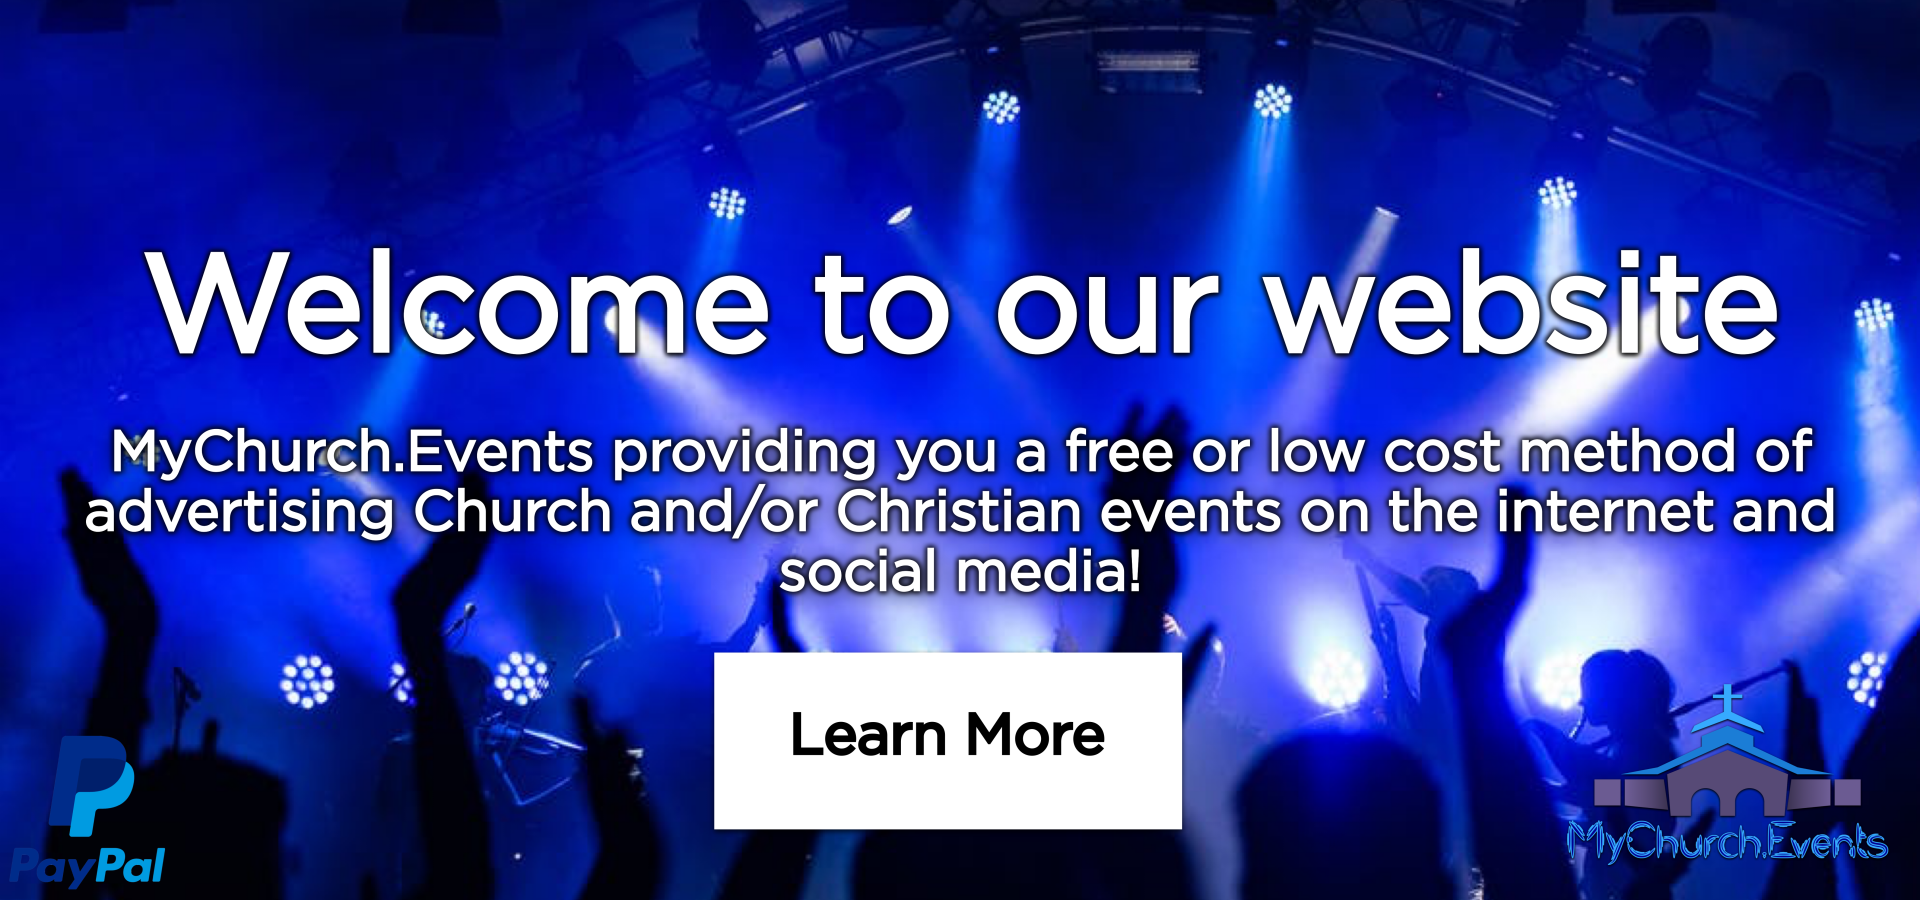 MyChurch.Events - Welcome to our website banner